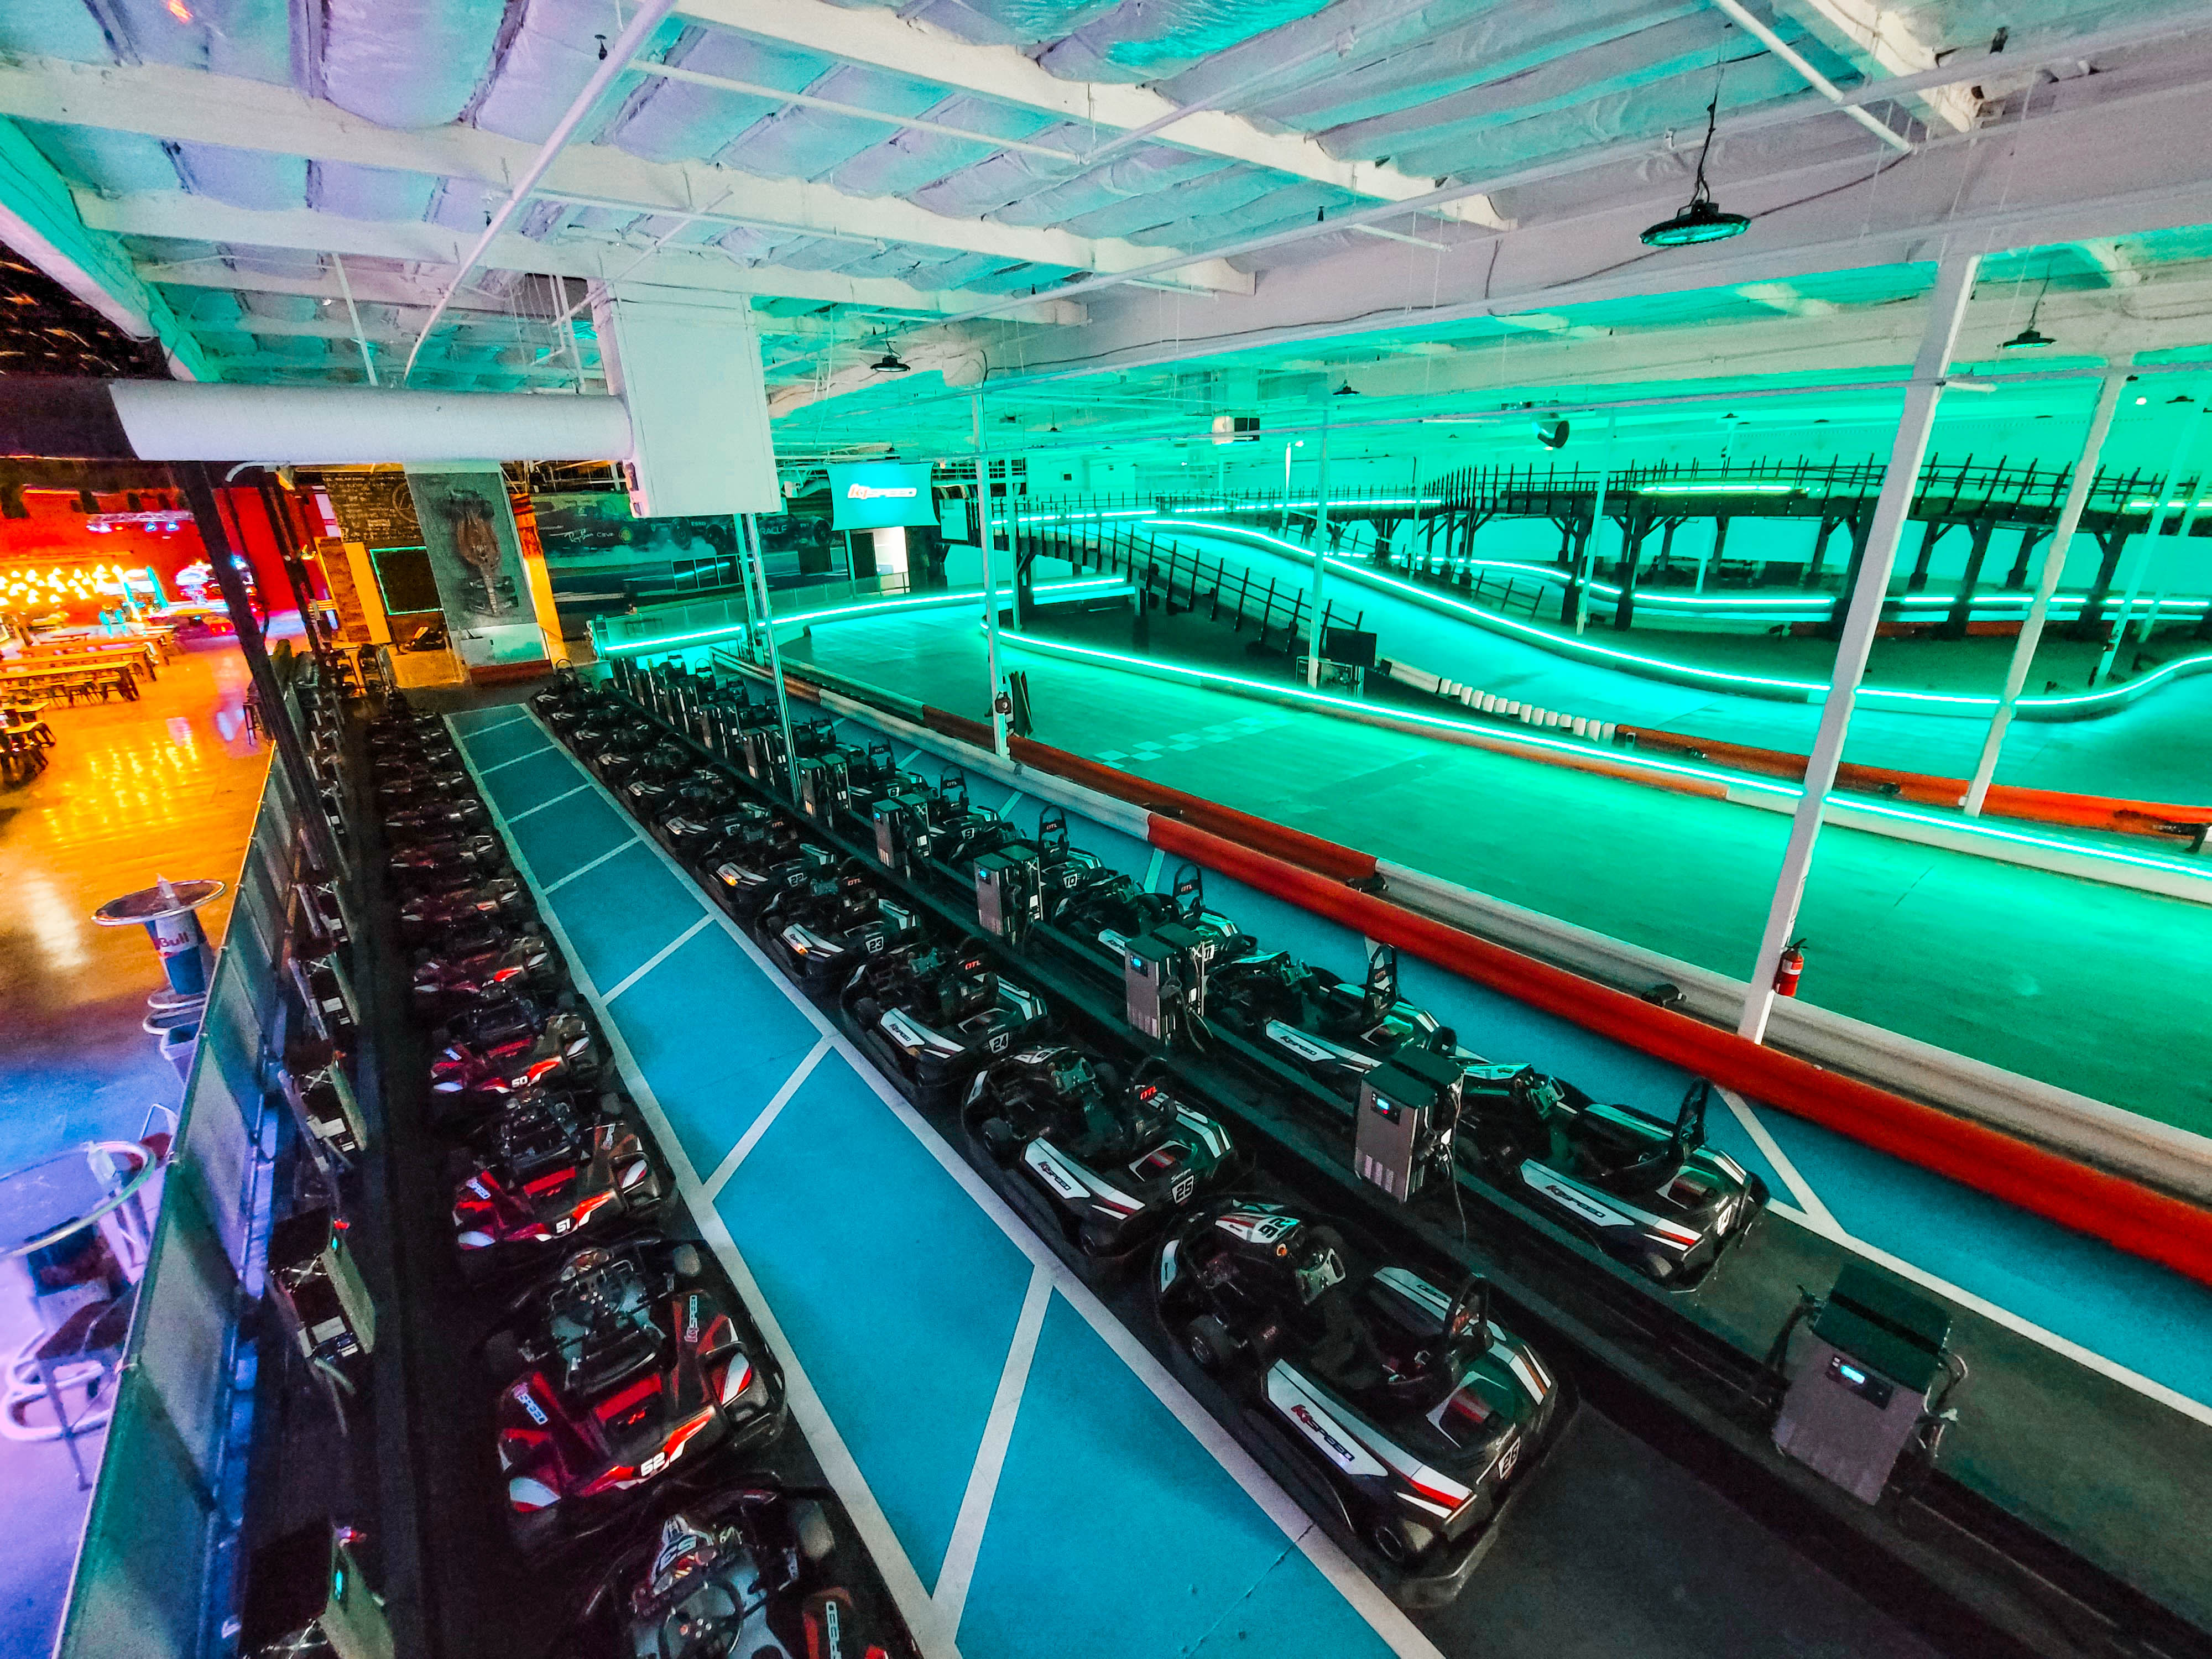 The indoor kart track is lined with LED lighting